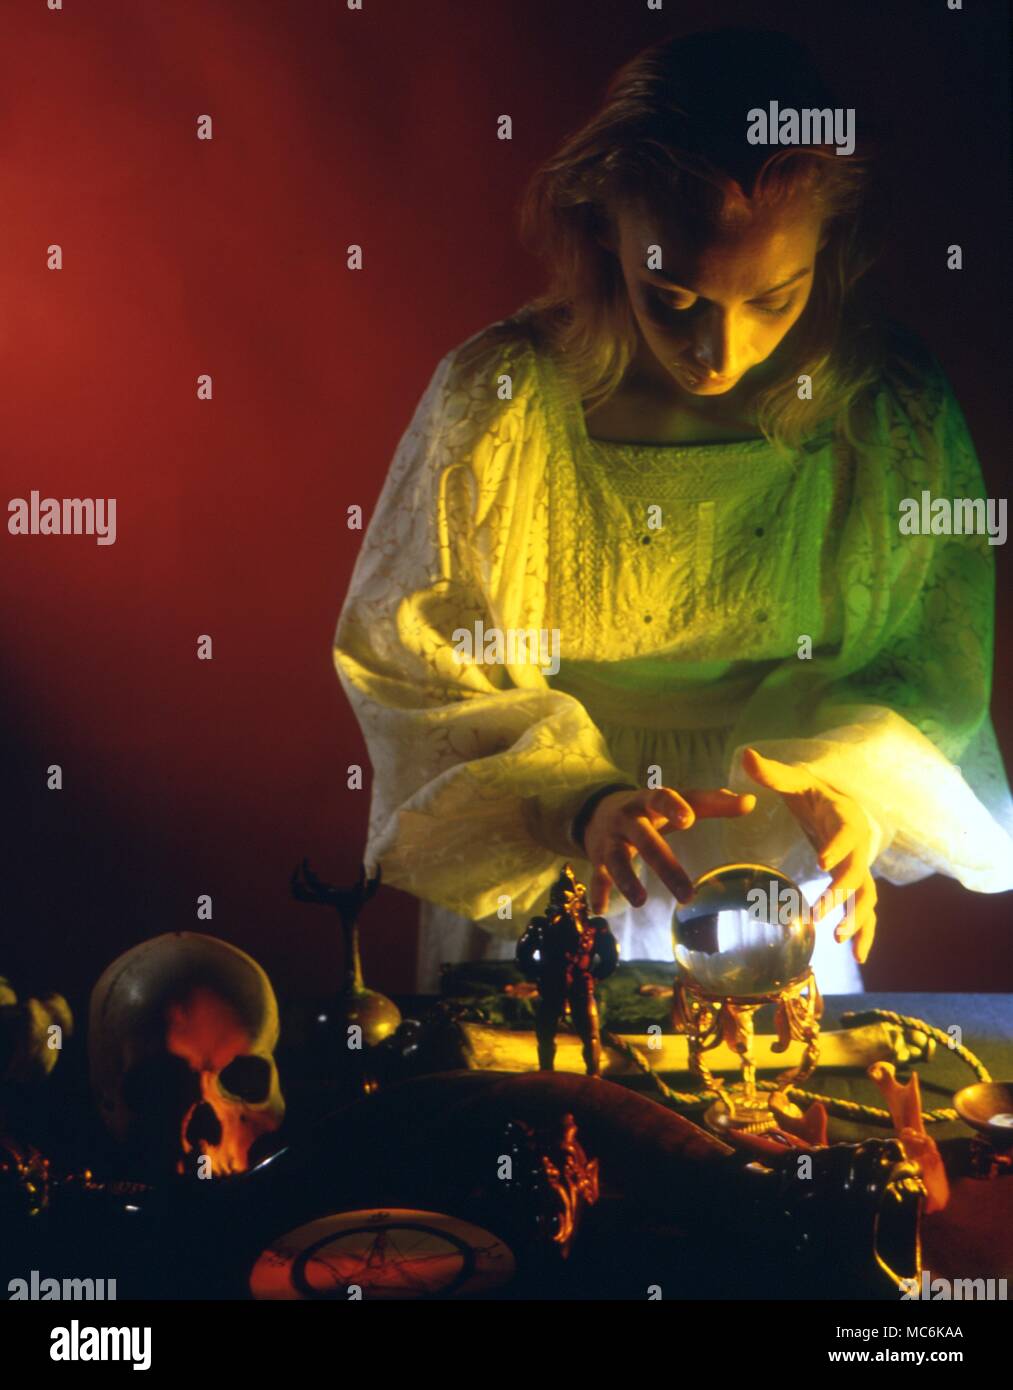 Crystal gazing. Clairvoyant with a crystal ball on a table upon which is displayed a number of ritual objects. Stock Photo